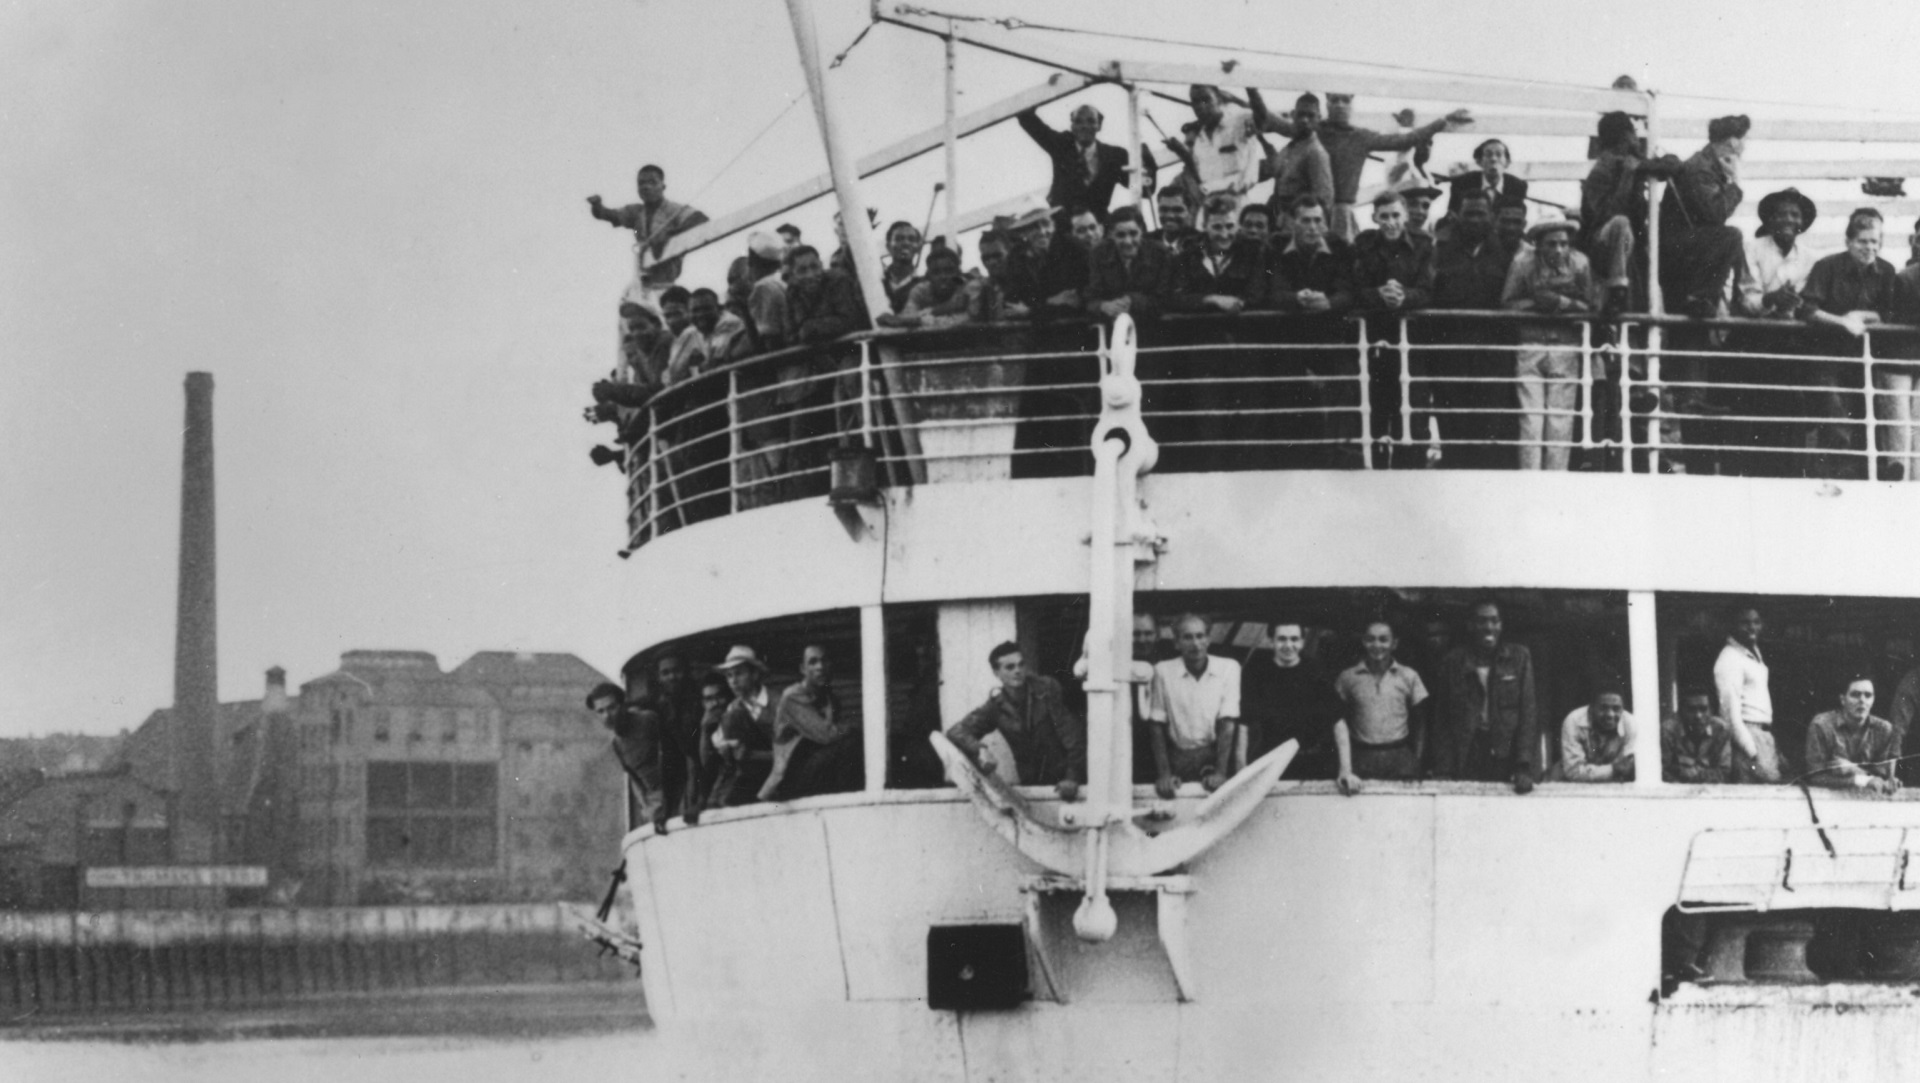 22nd June 1948: The ex-troopship 'Empire Windrush' arriving at Tilbury Docks from Jamaica, with 482 Jamaicans on board, emigrating to Britain. (Photo by Keystone/Getty Images)